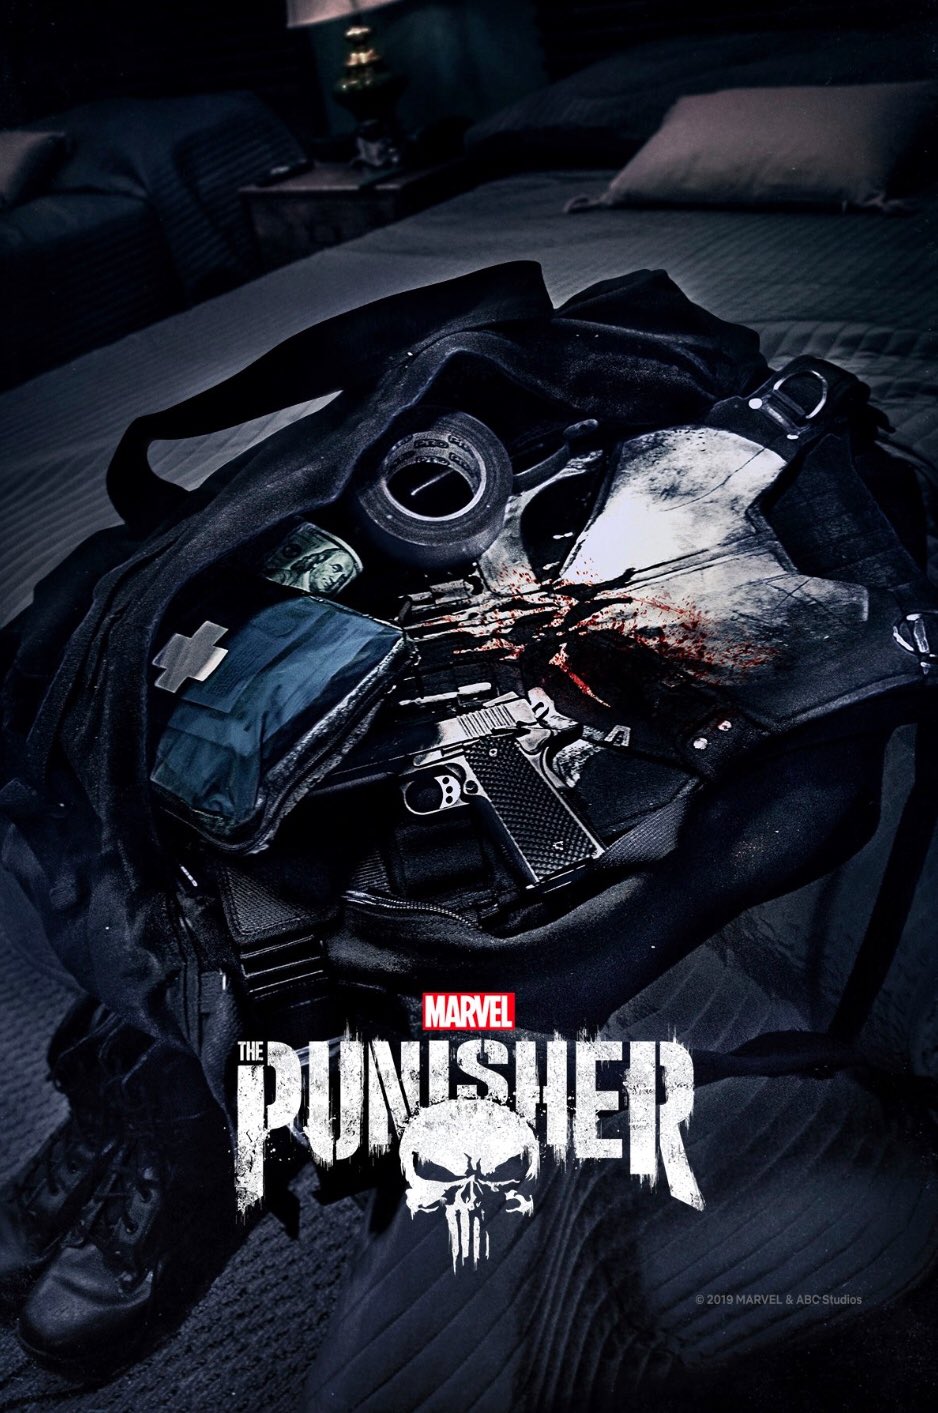 Official Marvel's The Punisher Season 2 Poster is out!